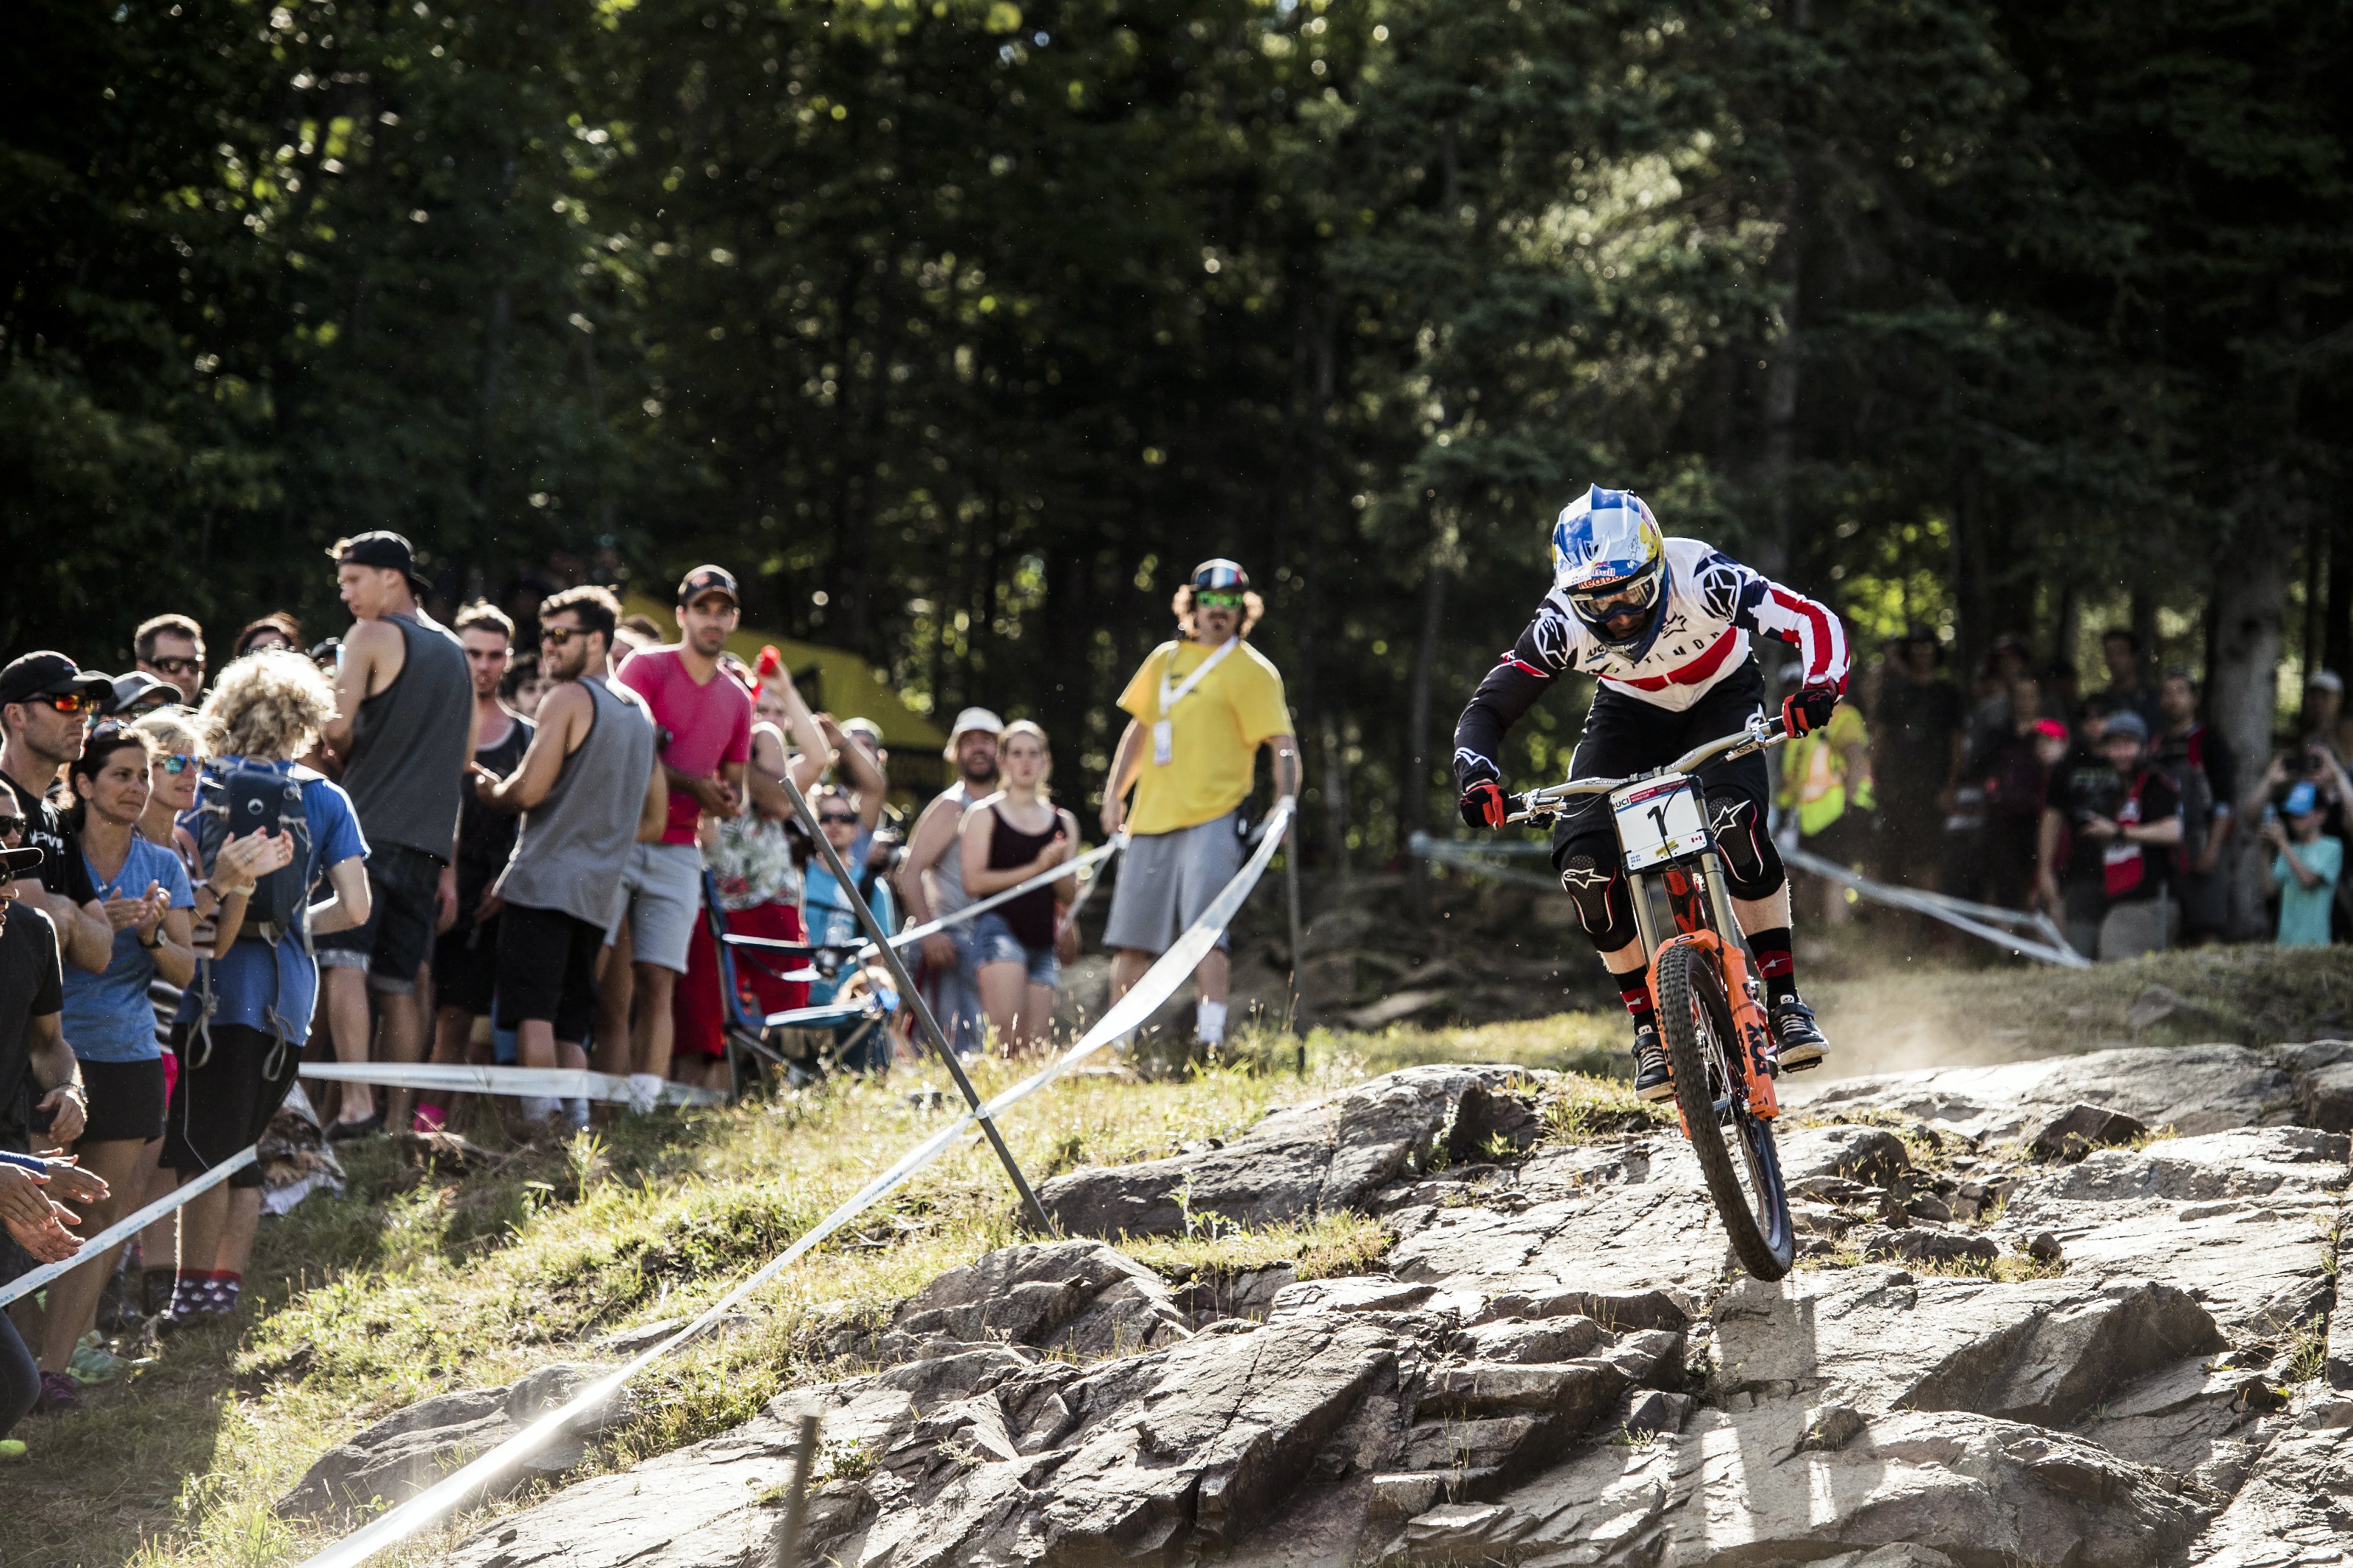 Mont-Sainte-Anne16_Aaron Gwin_Action_(c)Bartek Wolinski_Red Bull Content Pool